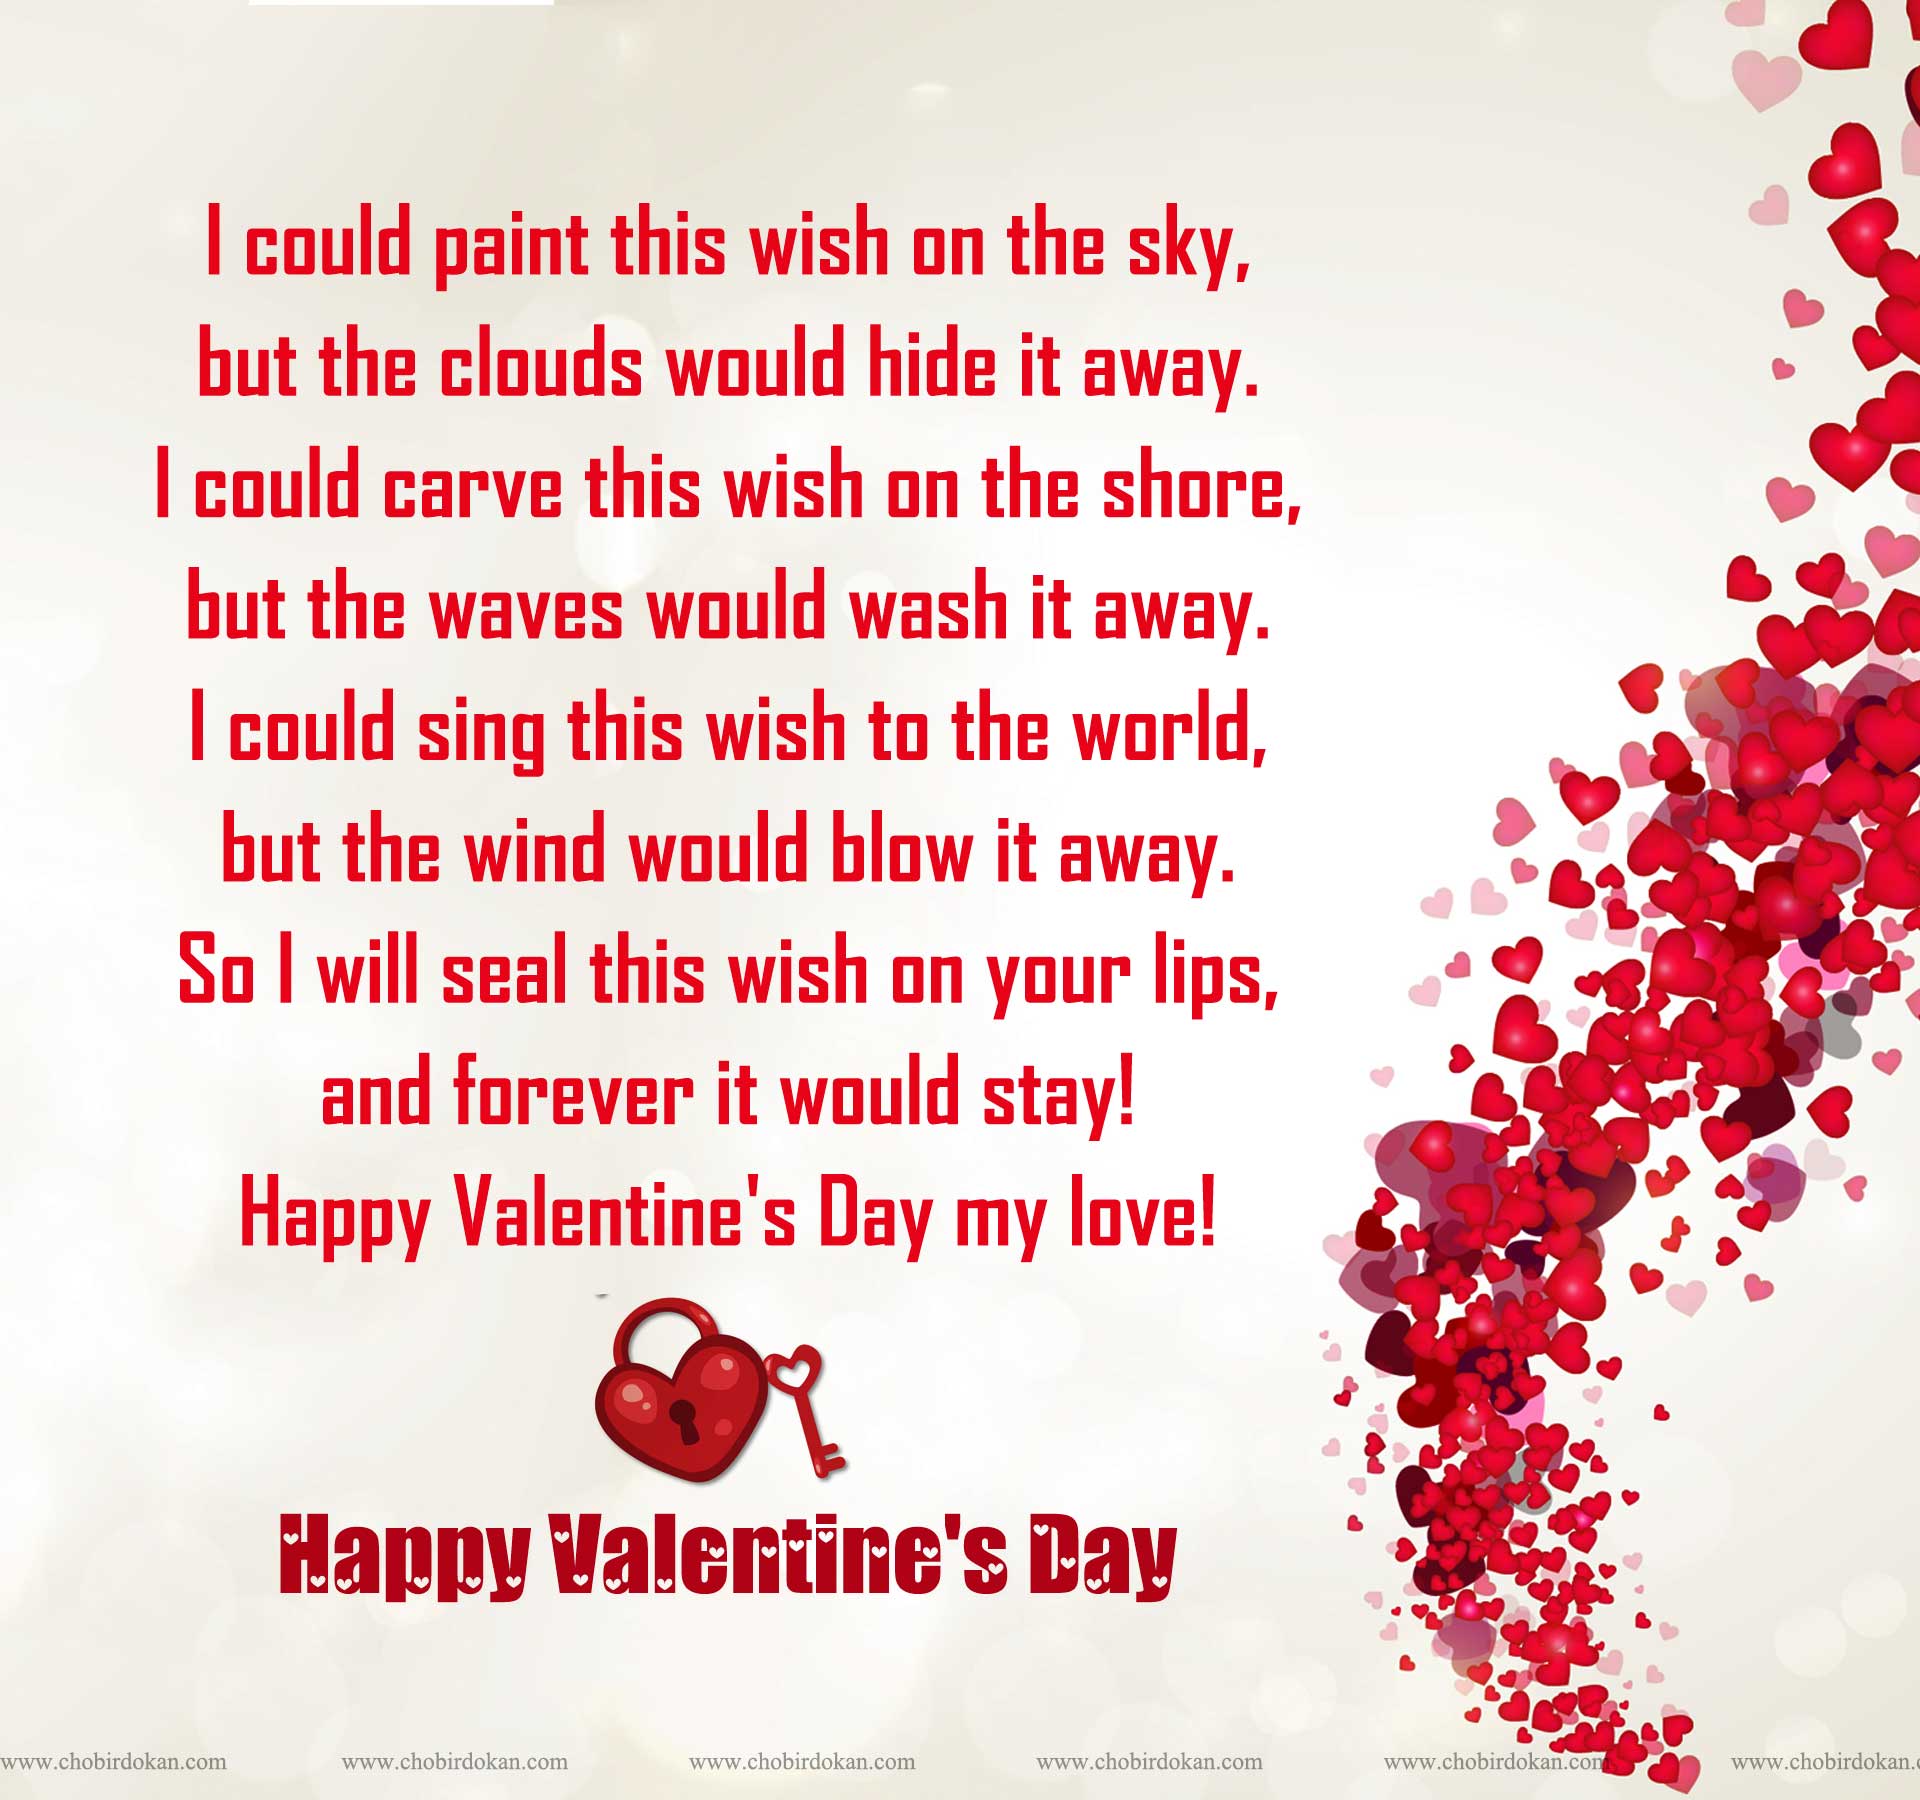 Happy Valentines Day Poems For Her, For Your Girlfriend or Wife|Poems|Chobirdokan